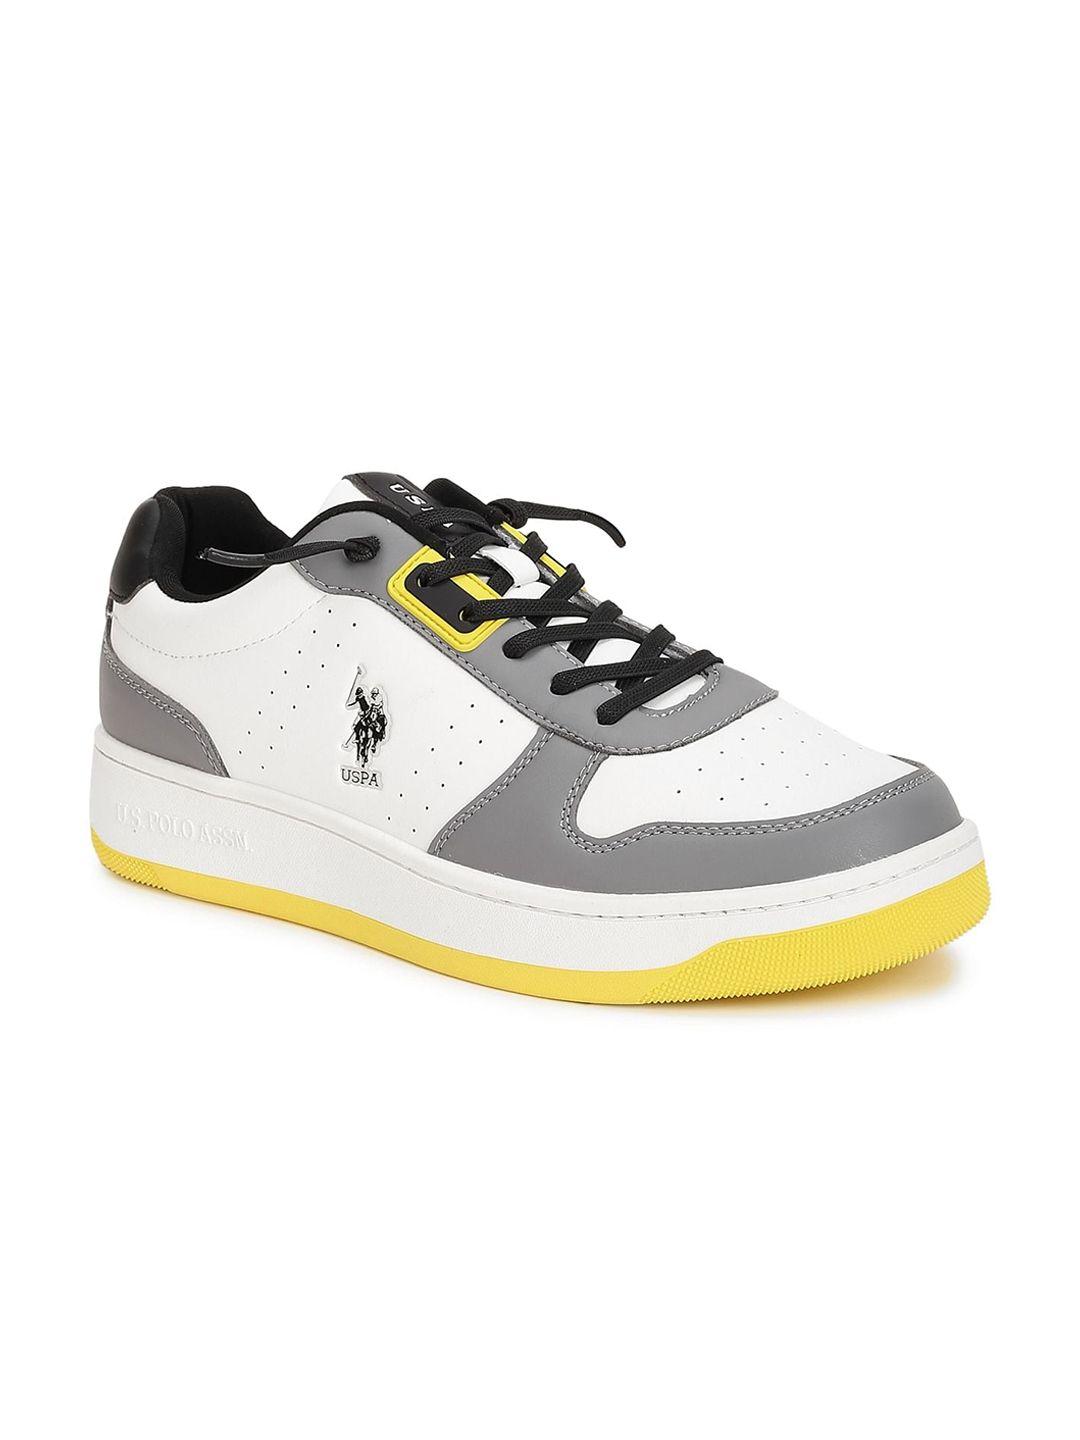 u.s.-polo-assn.-men-perforations-comfort-insole-sneakers